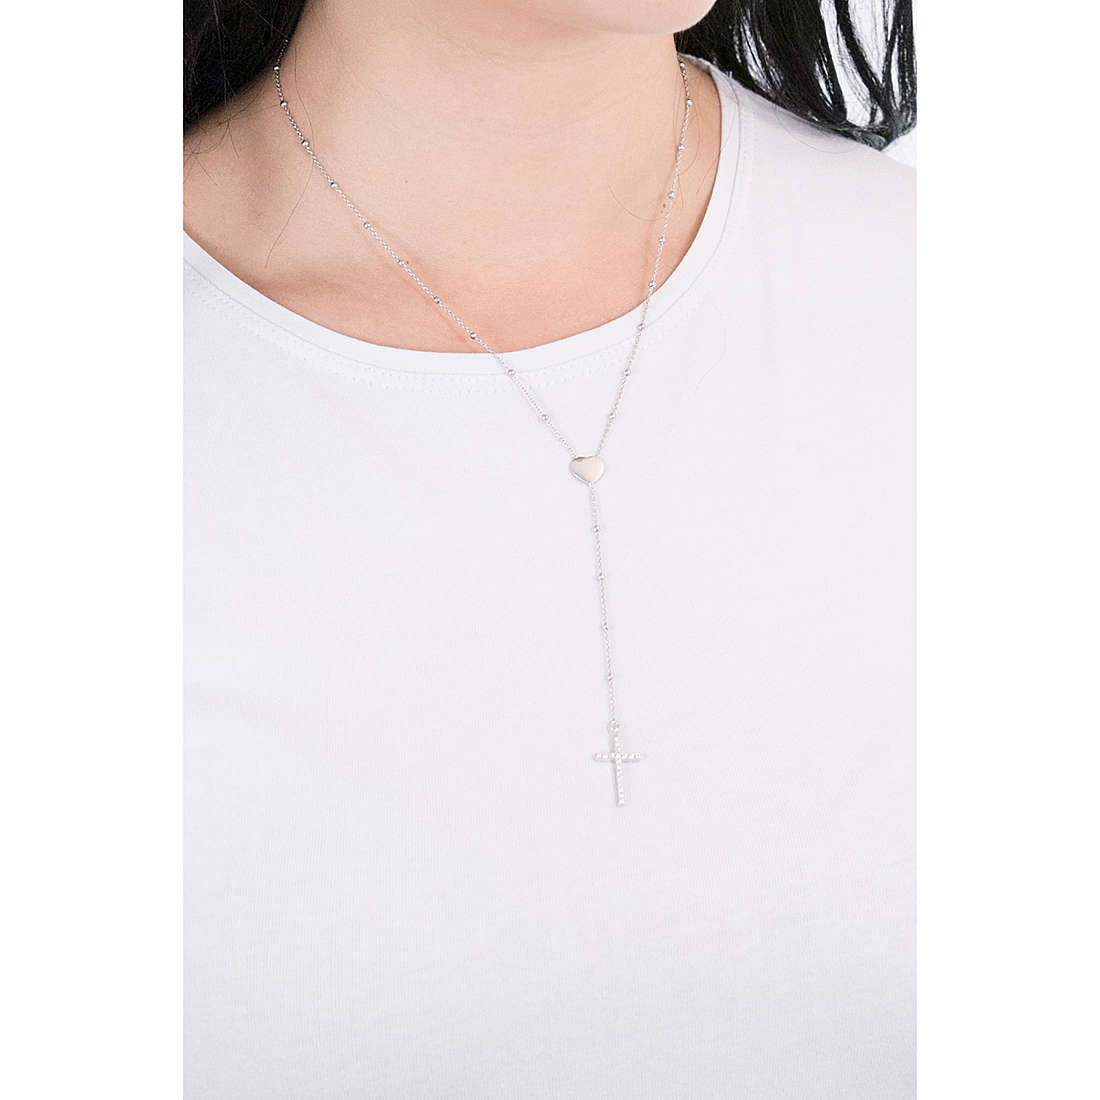 Amen necklaces woman CLHCRZB wearing